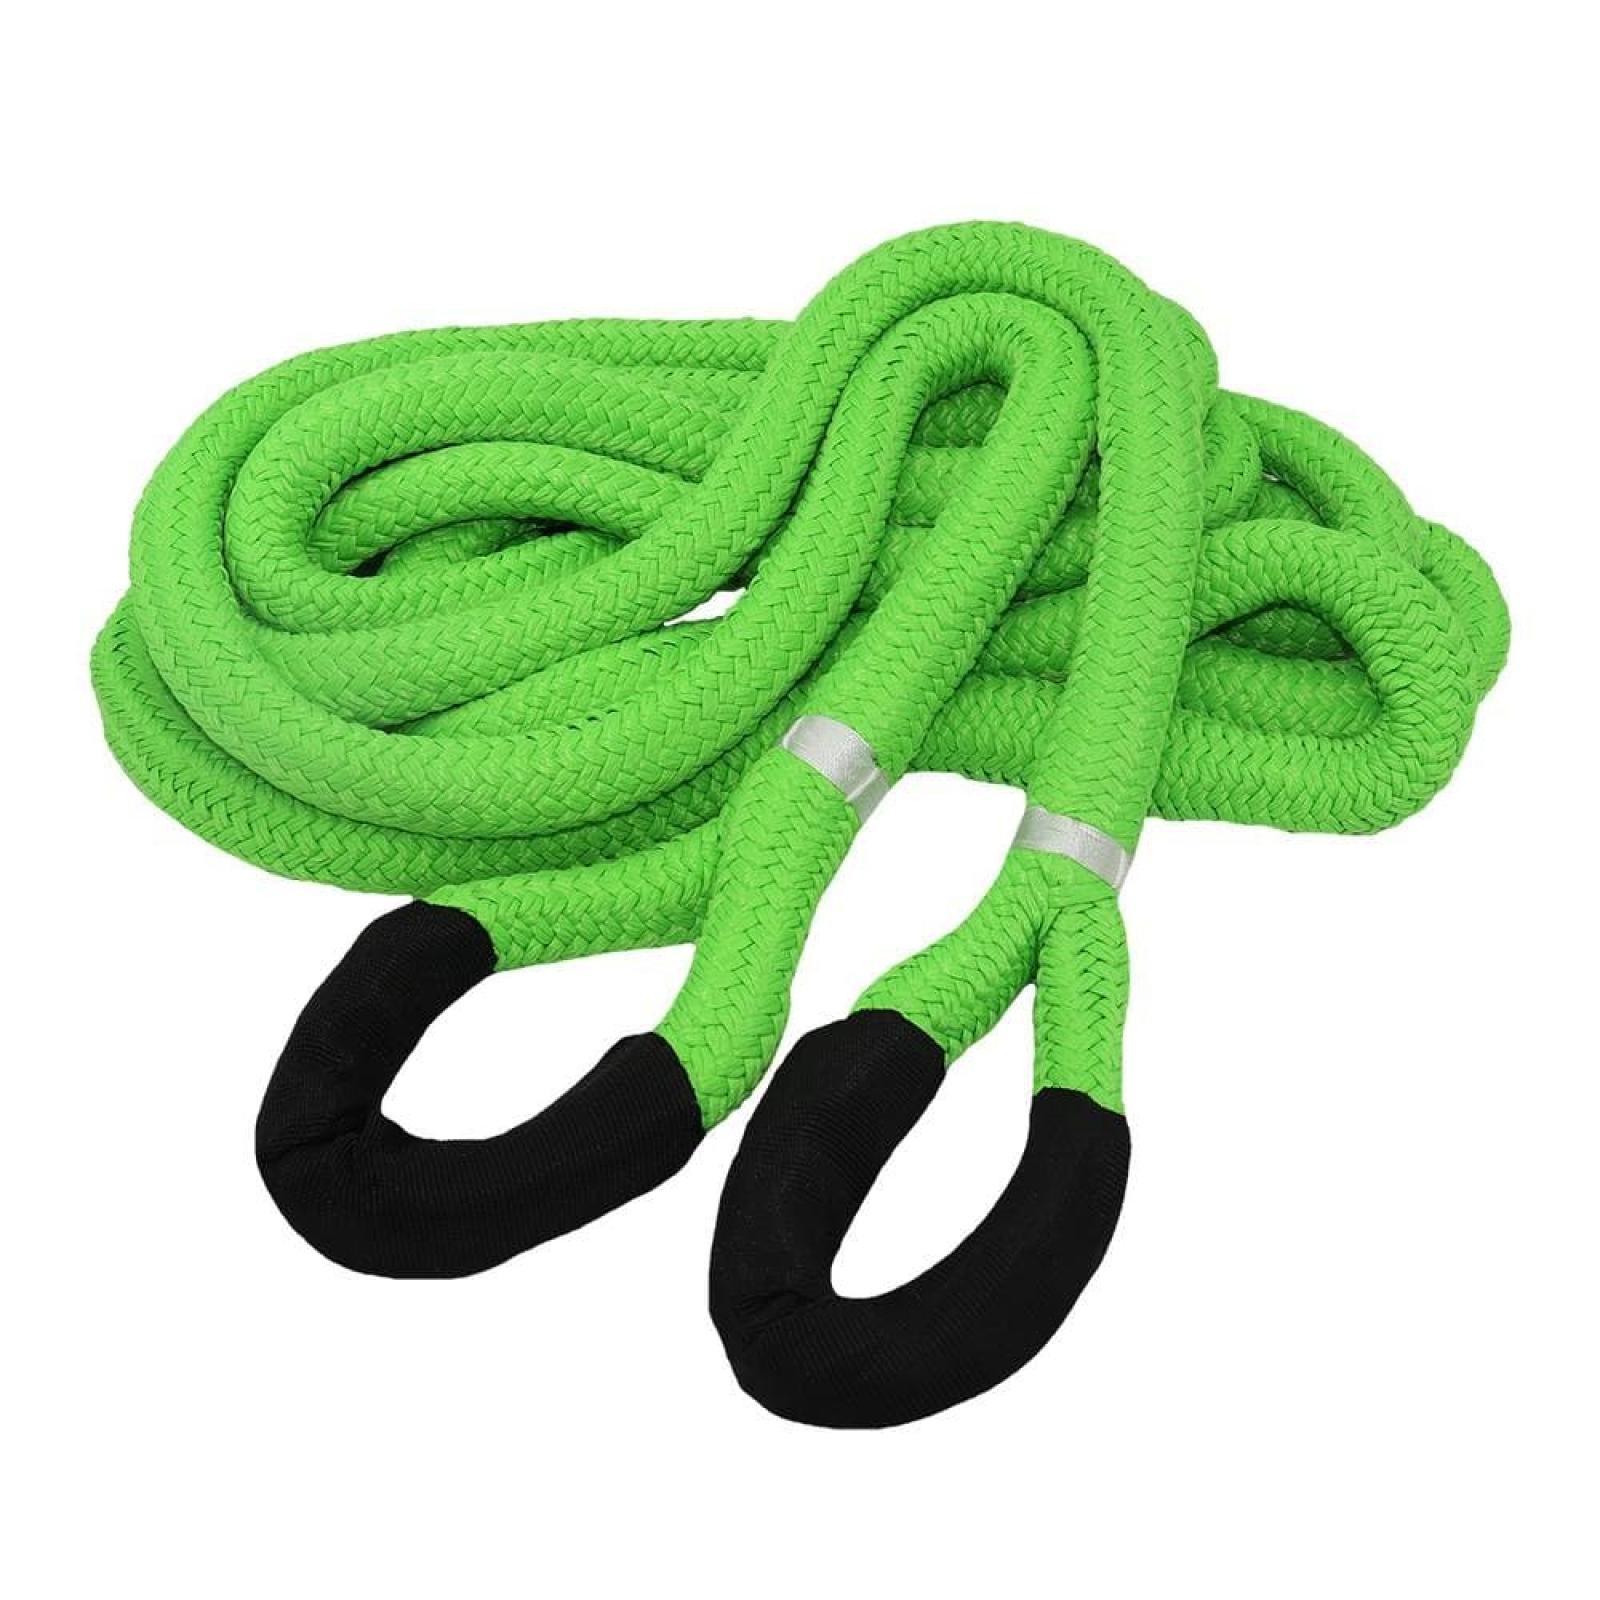 Grip Kinetic Energy Recovery Rope